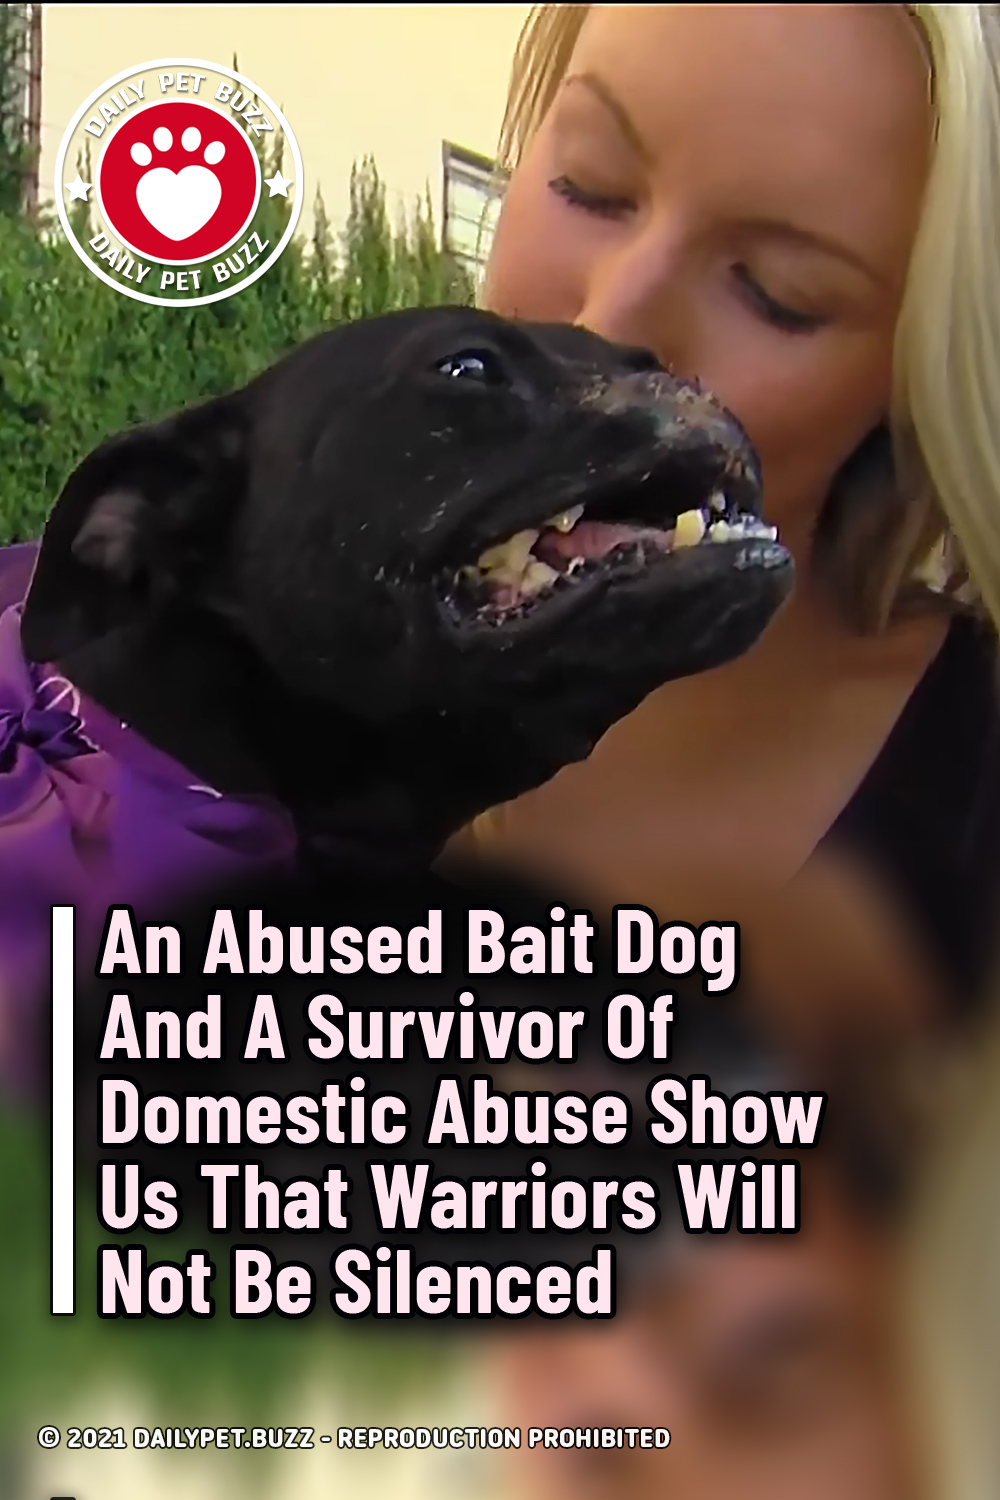 An Abused Bait Dog And A Survivor Of Domestic Abuse Show Us That Warriors Will Not Be Silenced